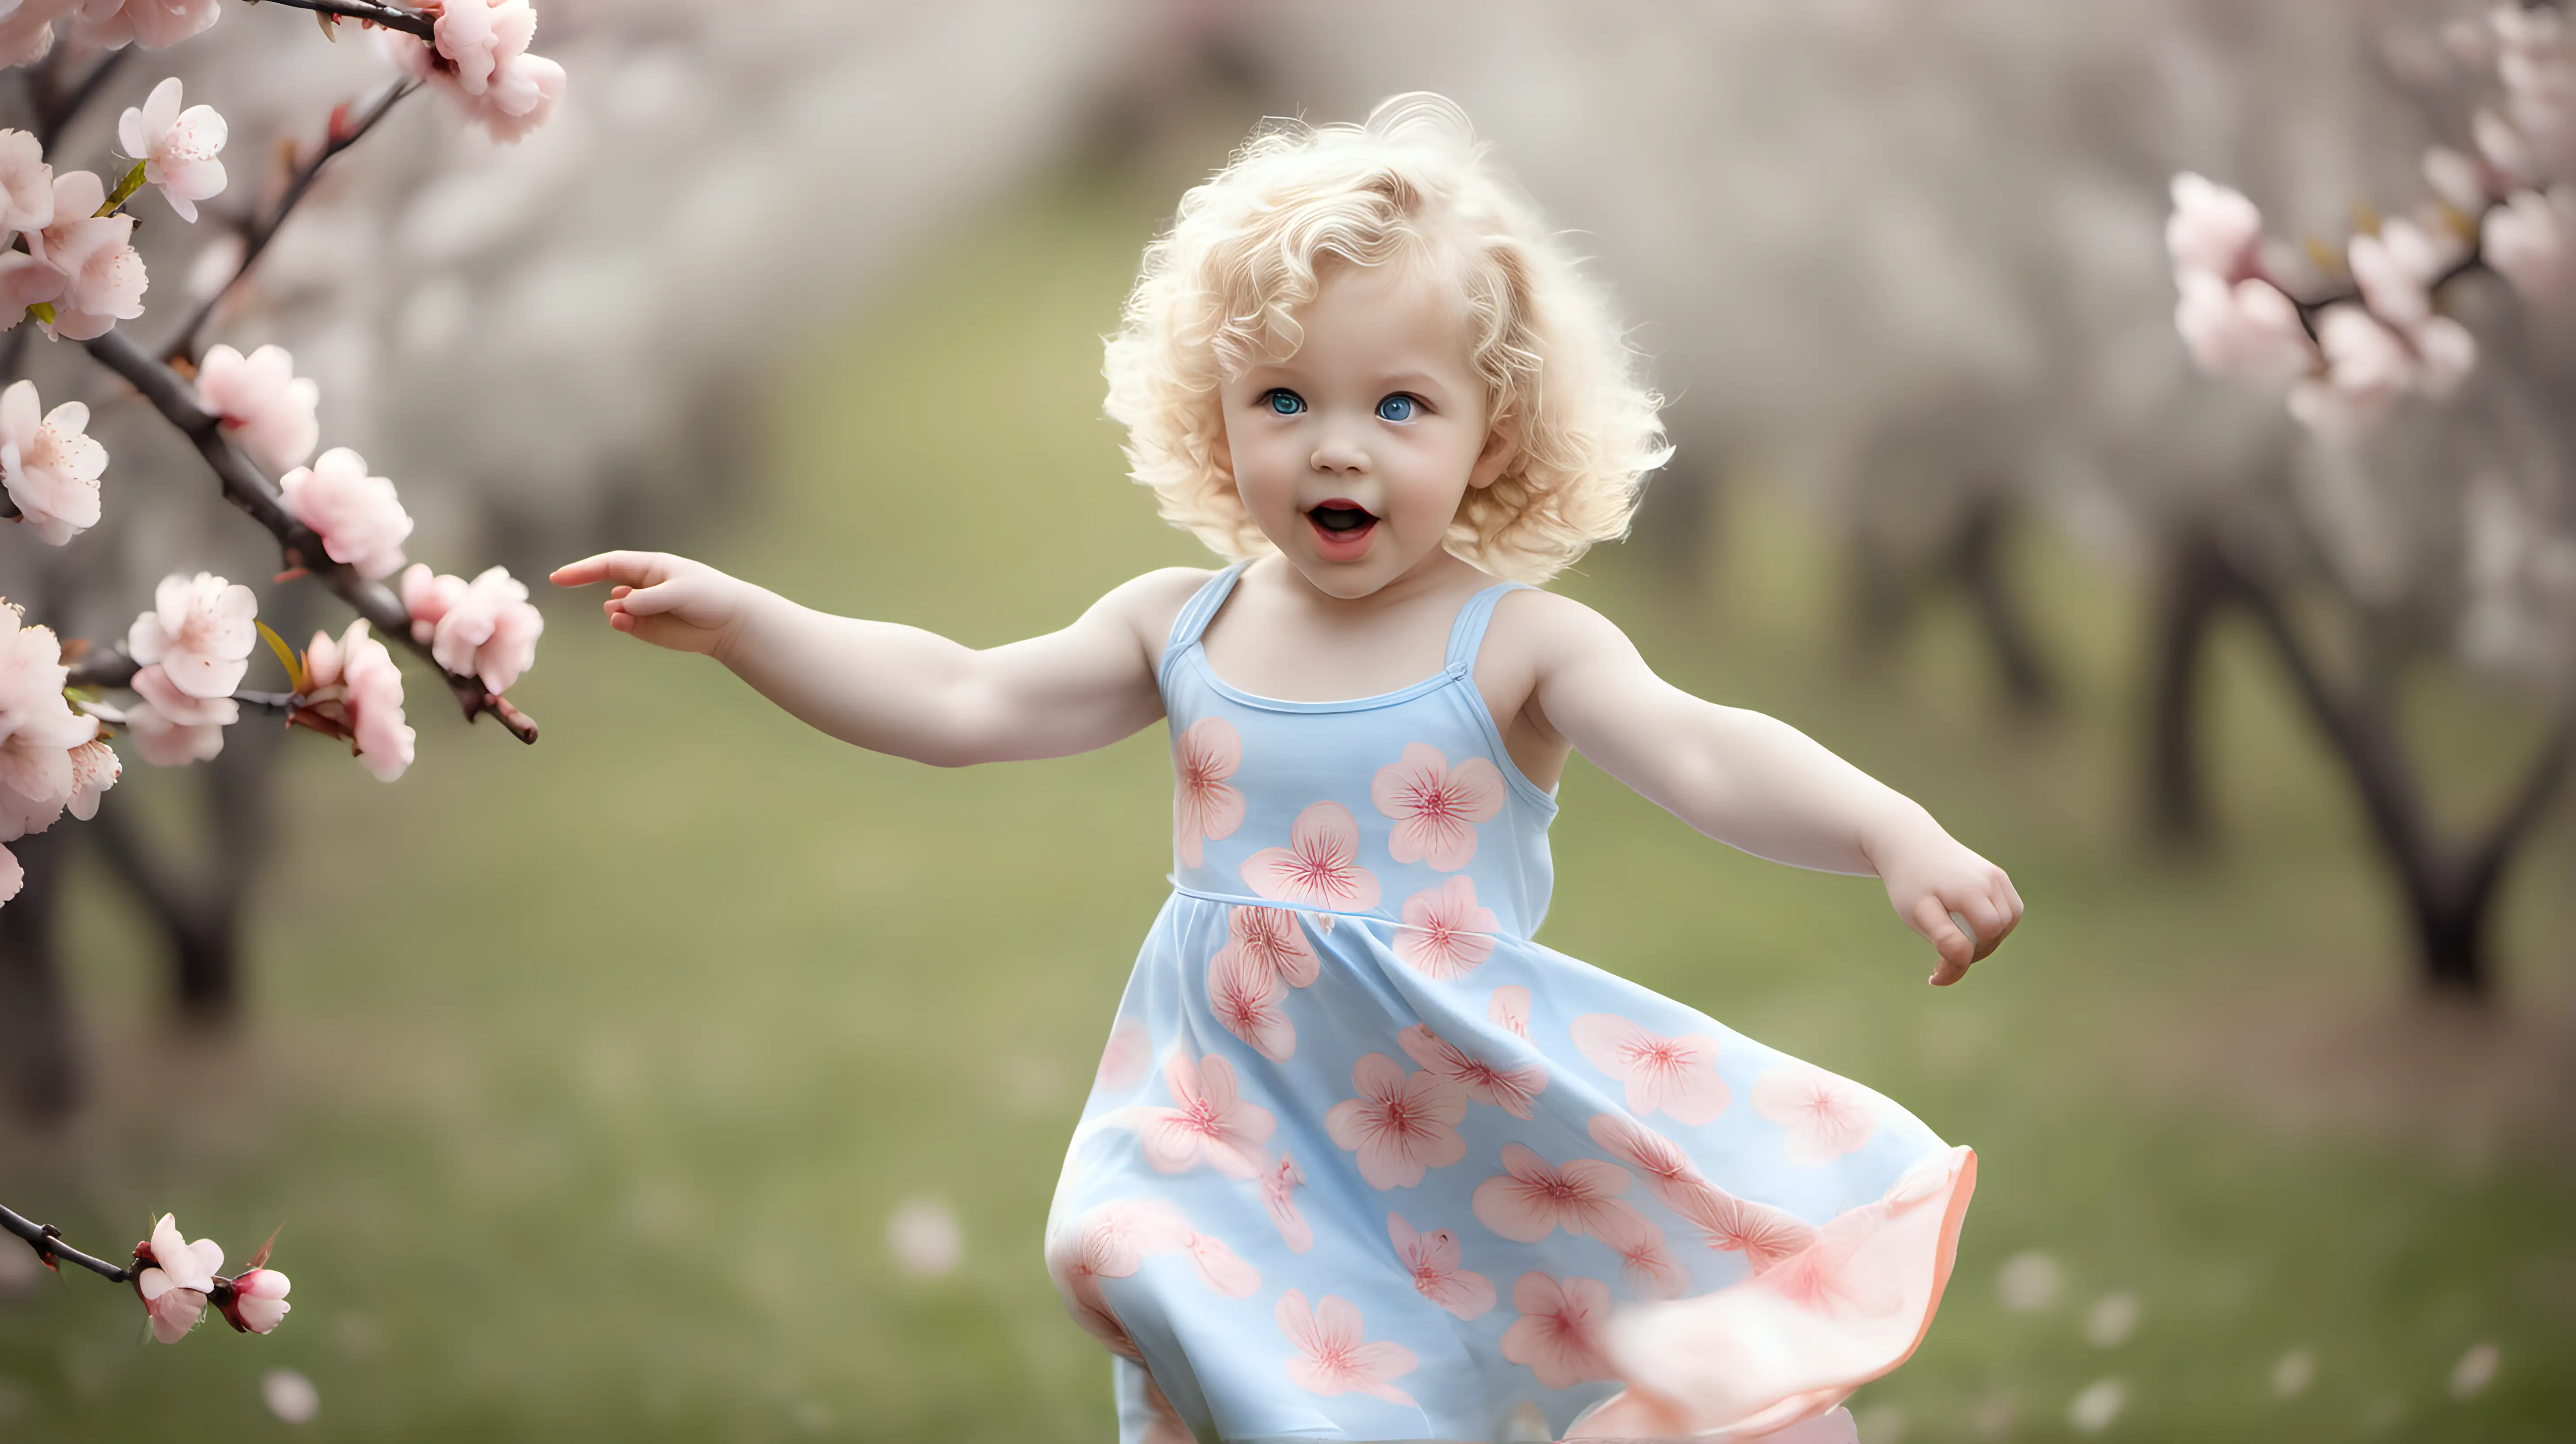 real photograph of peach blossom photo shoot of a curly blonde haired blue eyed  toddler girl twirling through the blossoms




